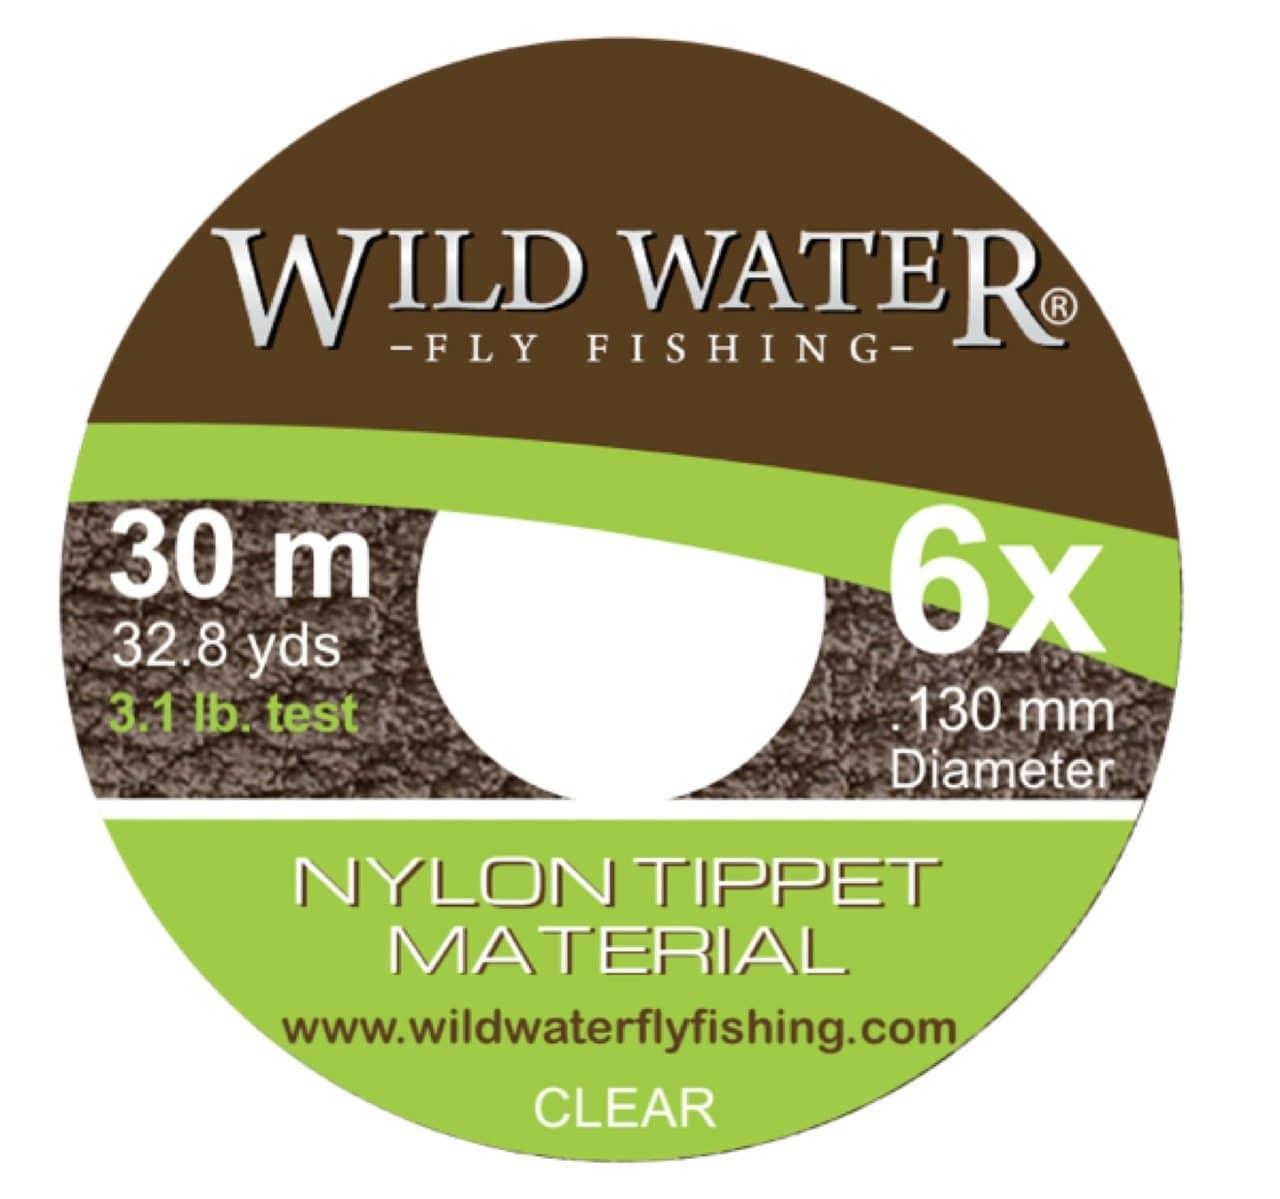 Wild Water Fly Fishing 6X Tippet